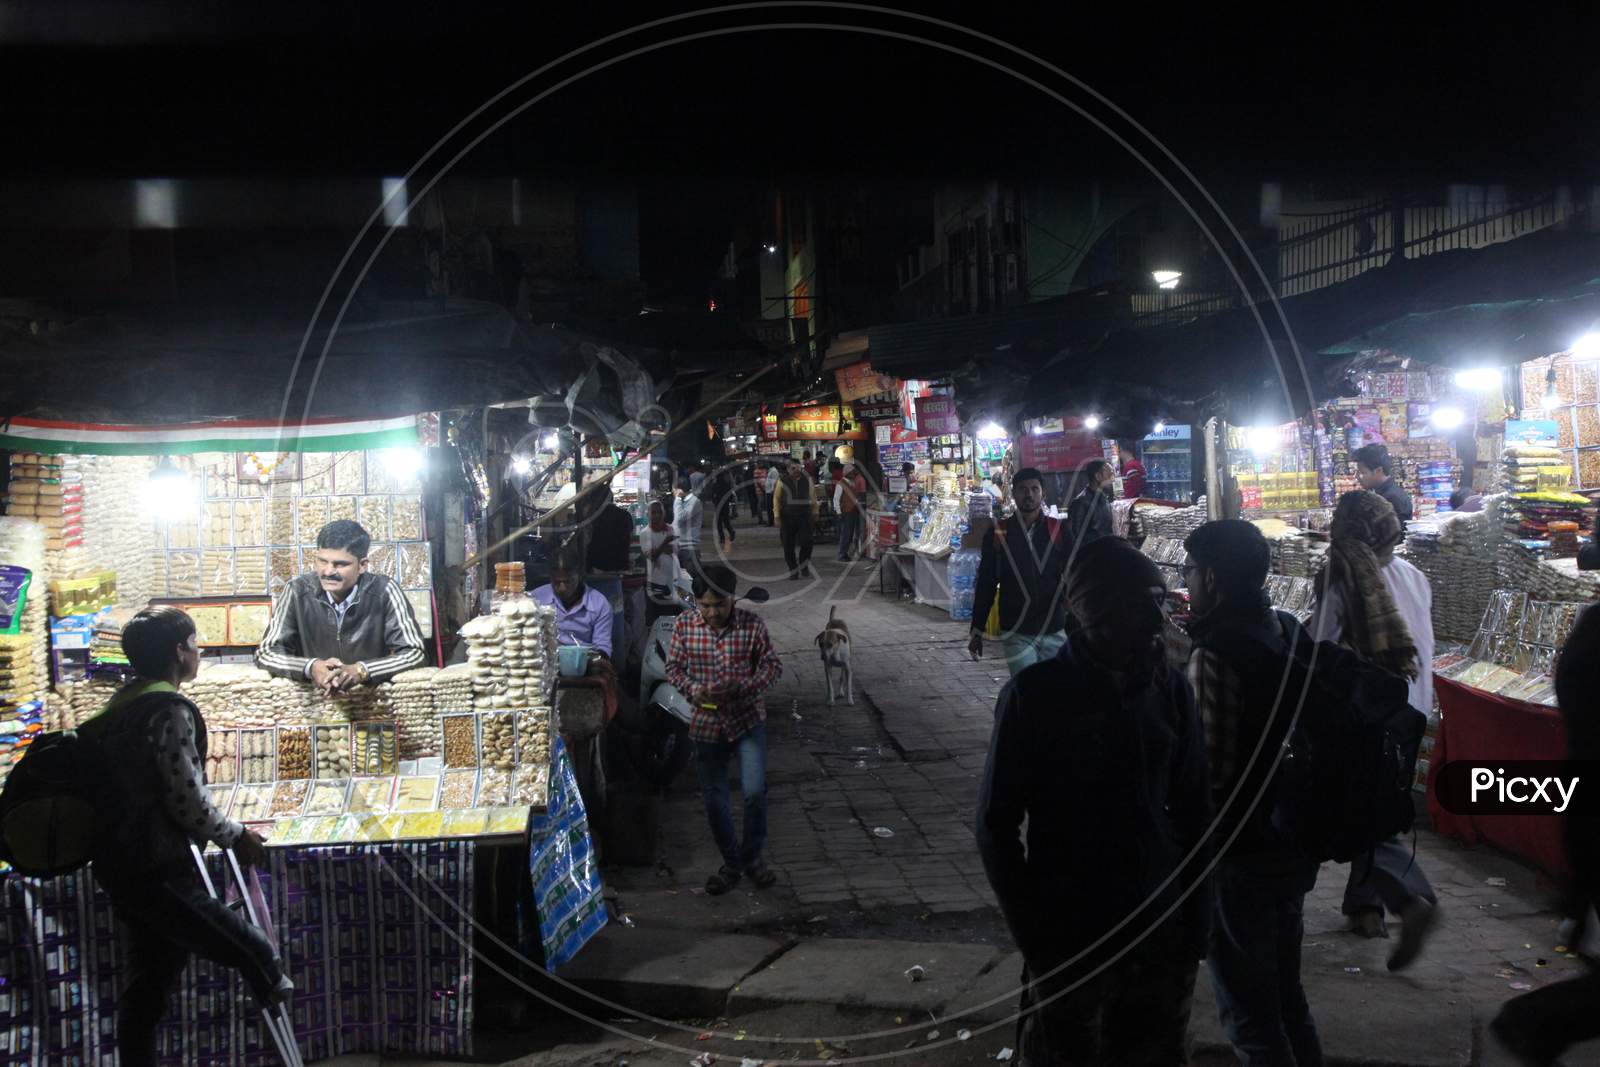 People shopping in a market during Night